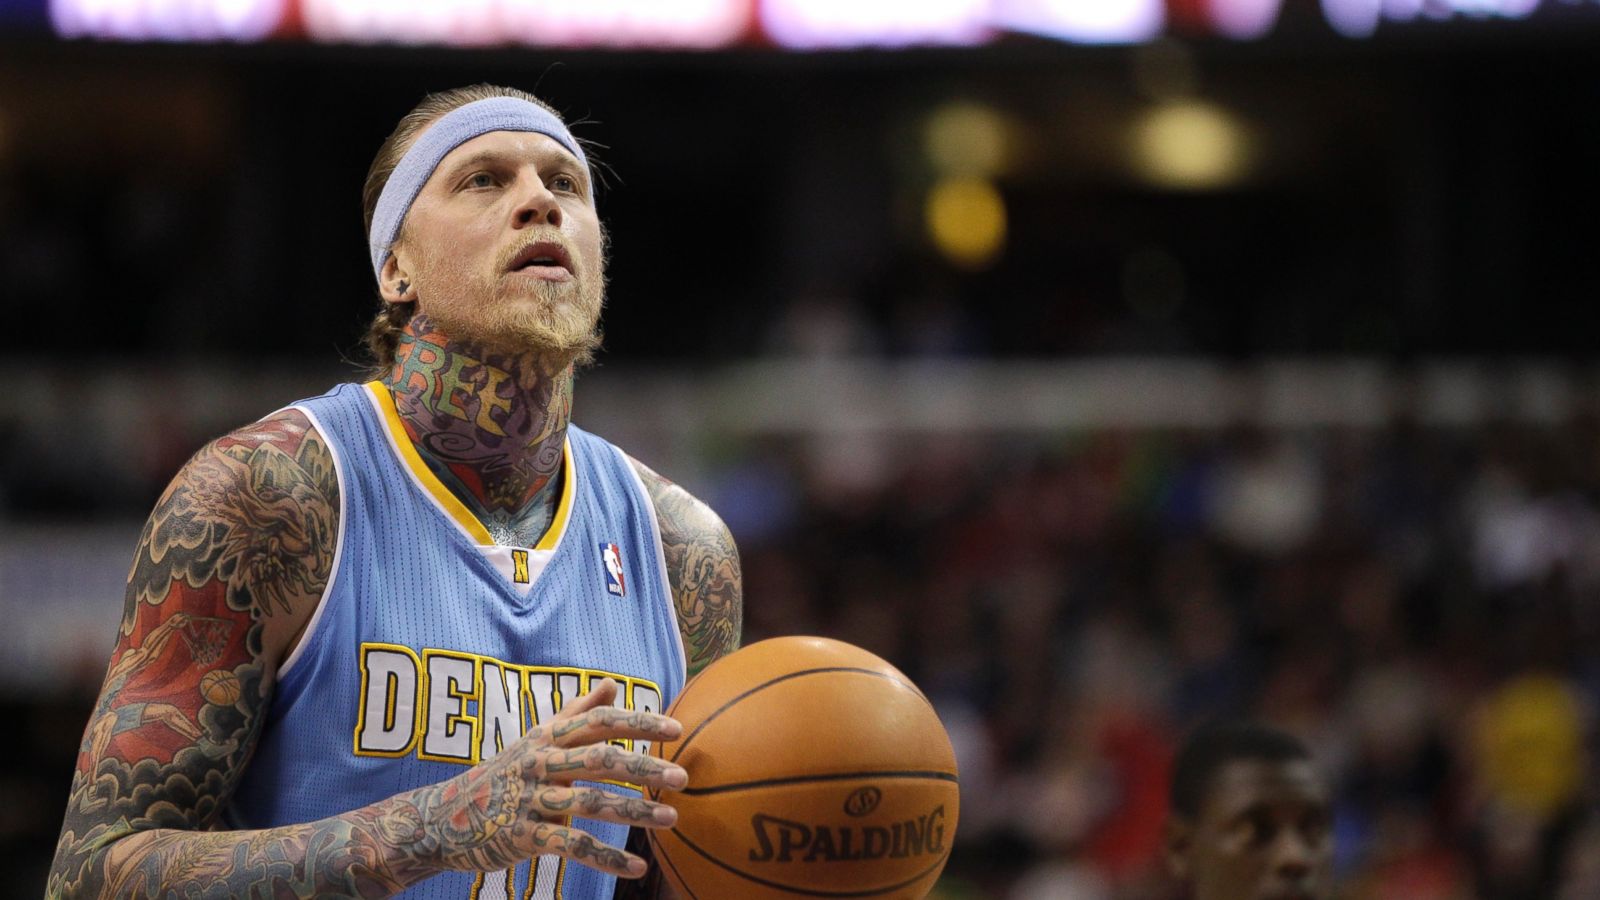 Why is Chris Andersen nicknamed 'Birdman'? Finding out more